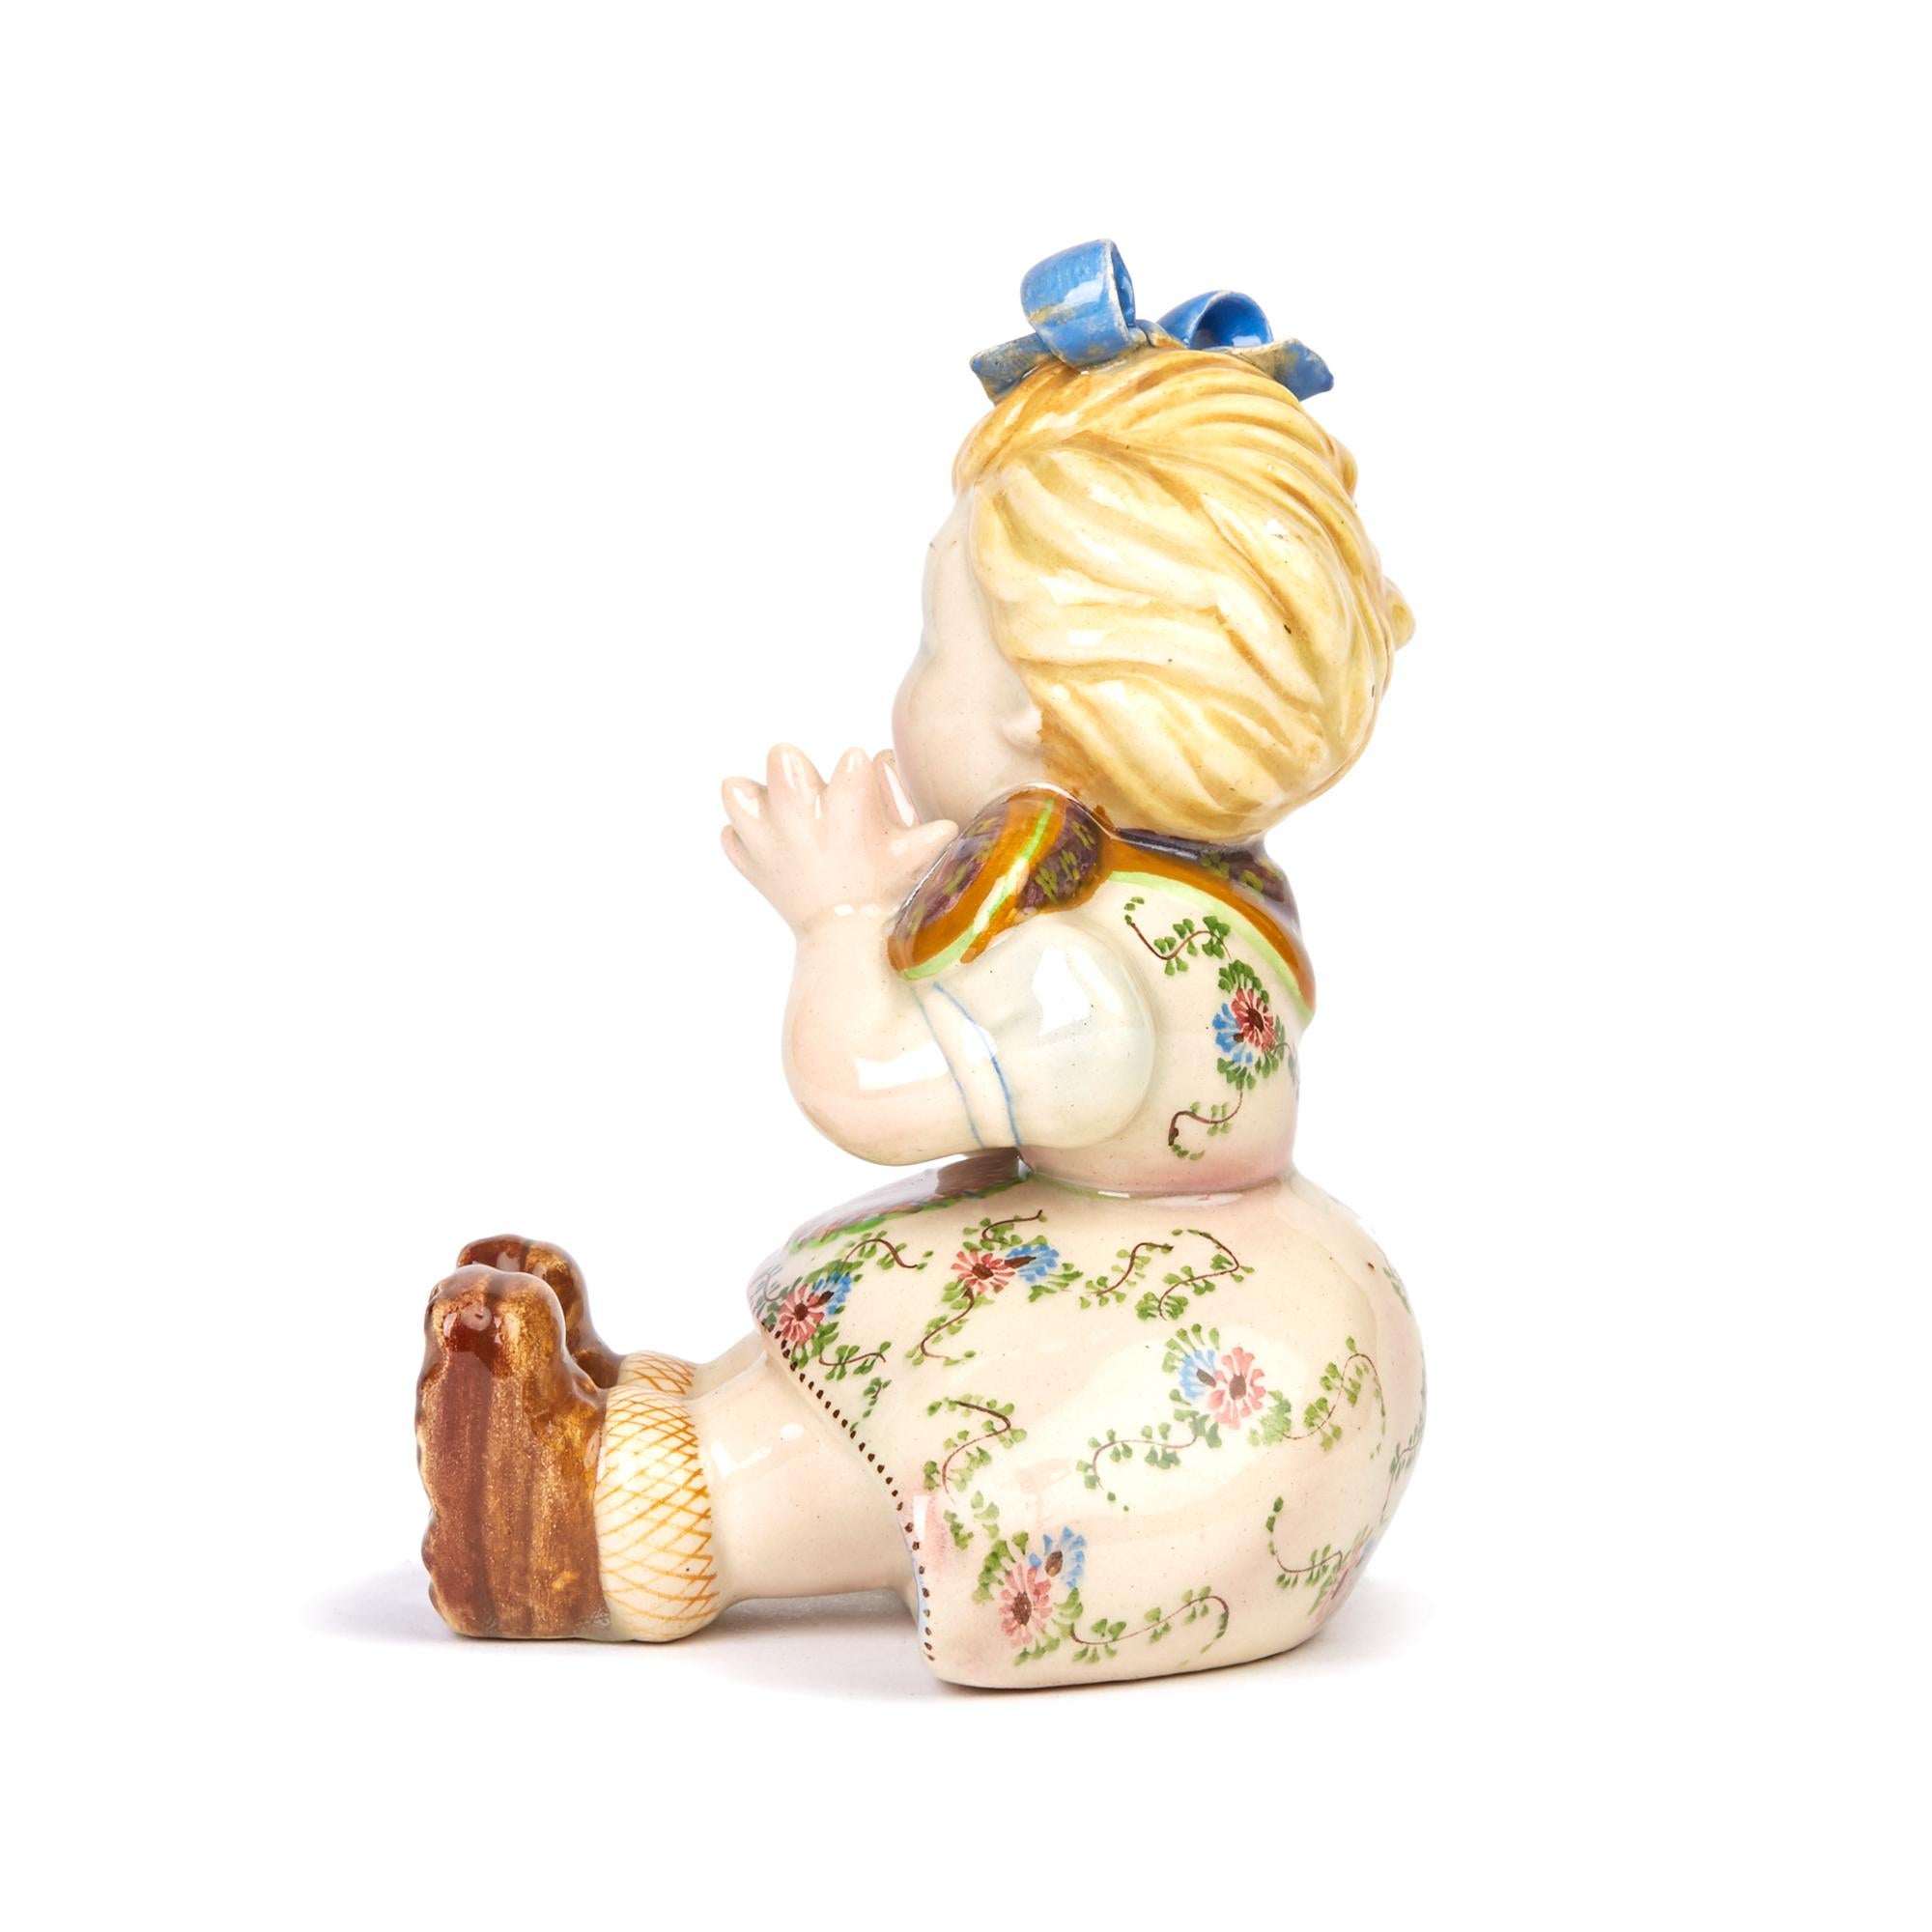 A charming quality Italian art pottery figure of a seated girl singing in the style and quality of Lenci dating, between 1930-1950. The figure sits wearing a floral painted dress and large blue painted bow to the hair and is finely hand painted in